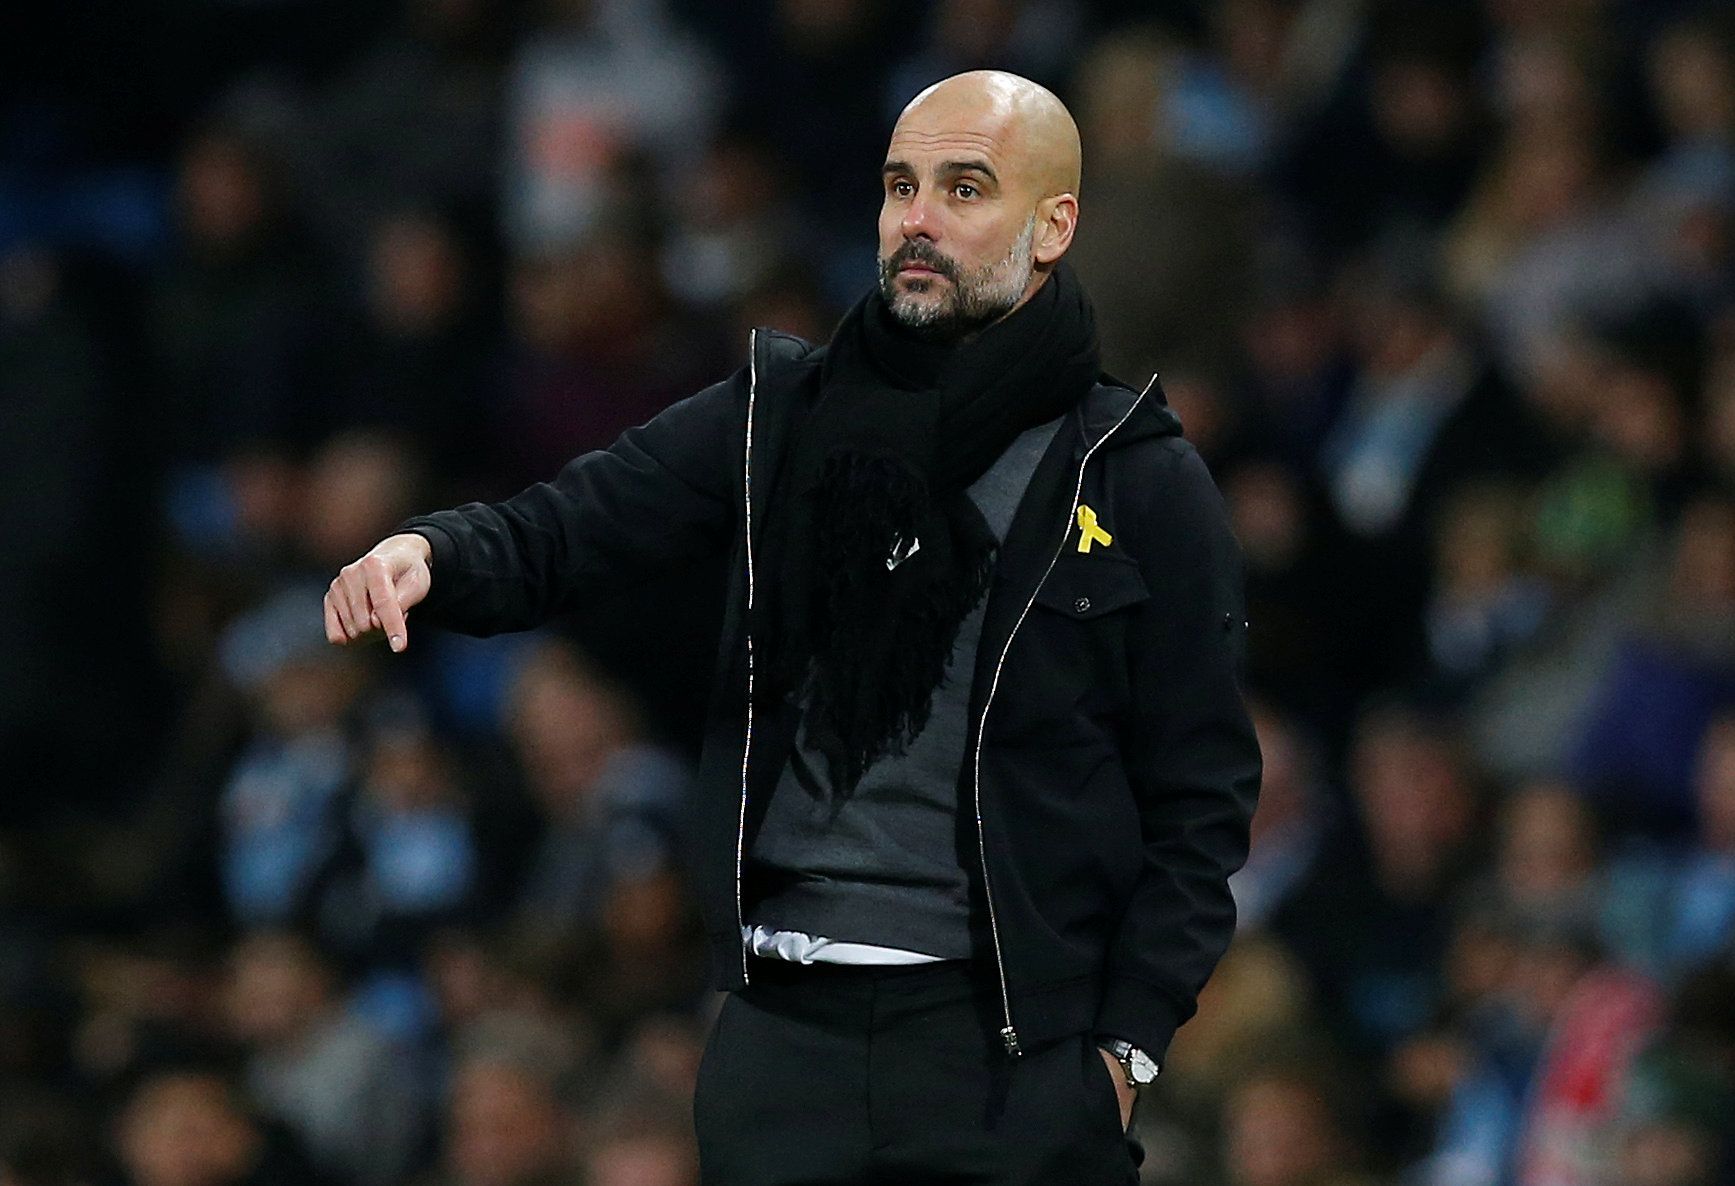 Soccer Football - Carabao Cup Semi Final First Leg - Manchester City vs Bristol City - Etihad Stadium, Manchester, Britain - January 9, 2018   Manchester City manager Pep Guardiola   REUTERS/Andrew Yates    EDITORIAL USE ONLY. No use with unauthorized audio, video, data, fixture lists, club/league logos or 